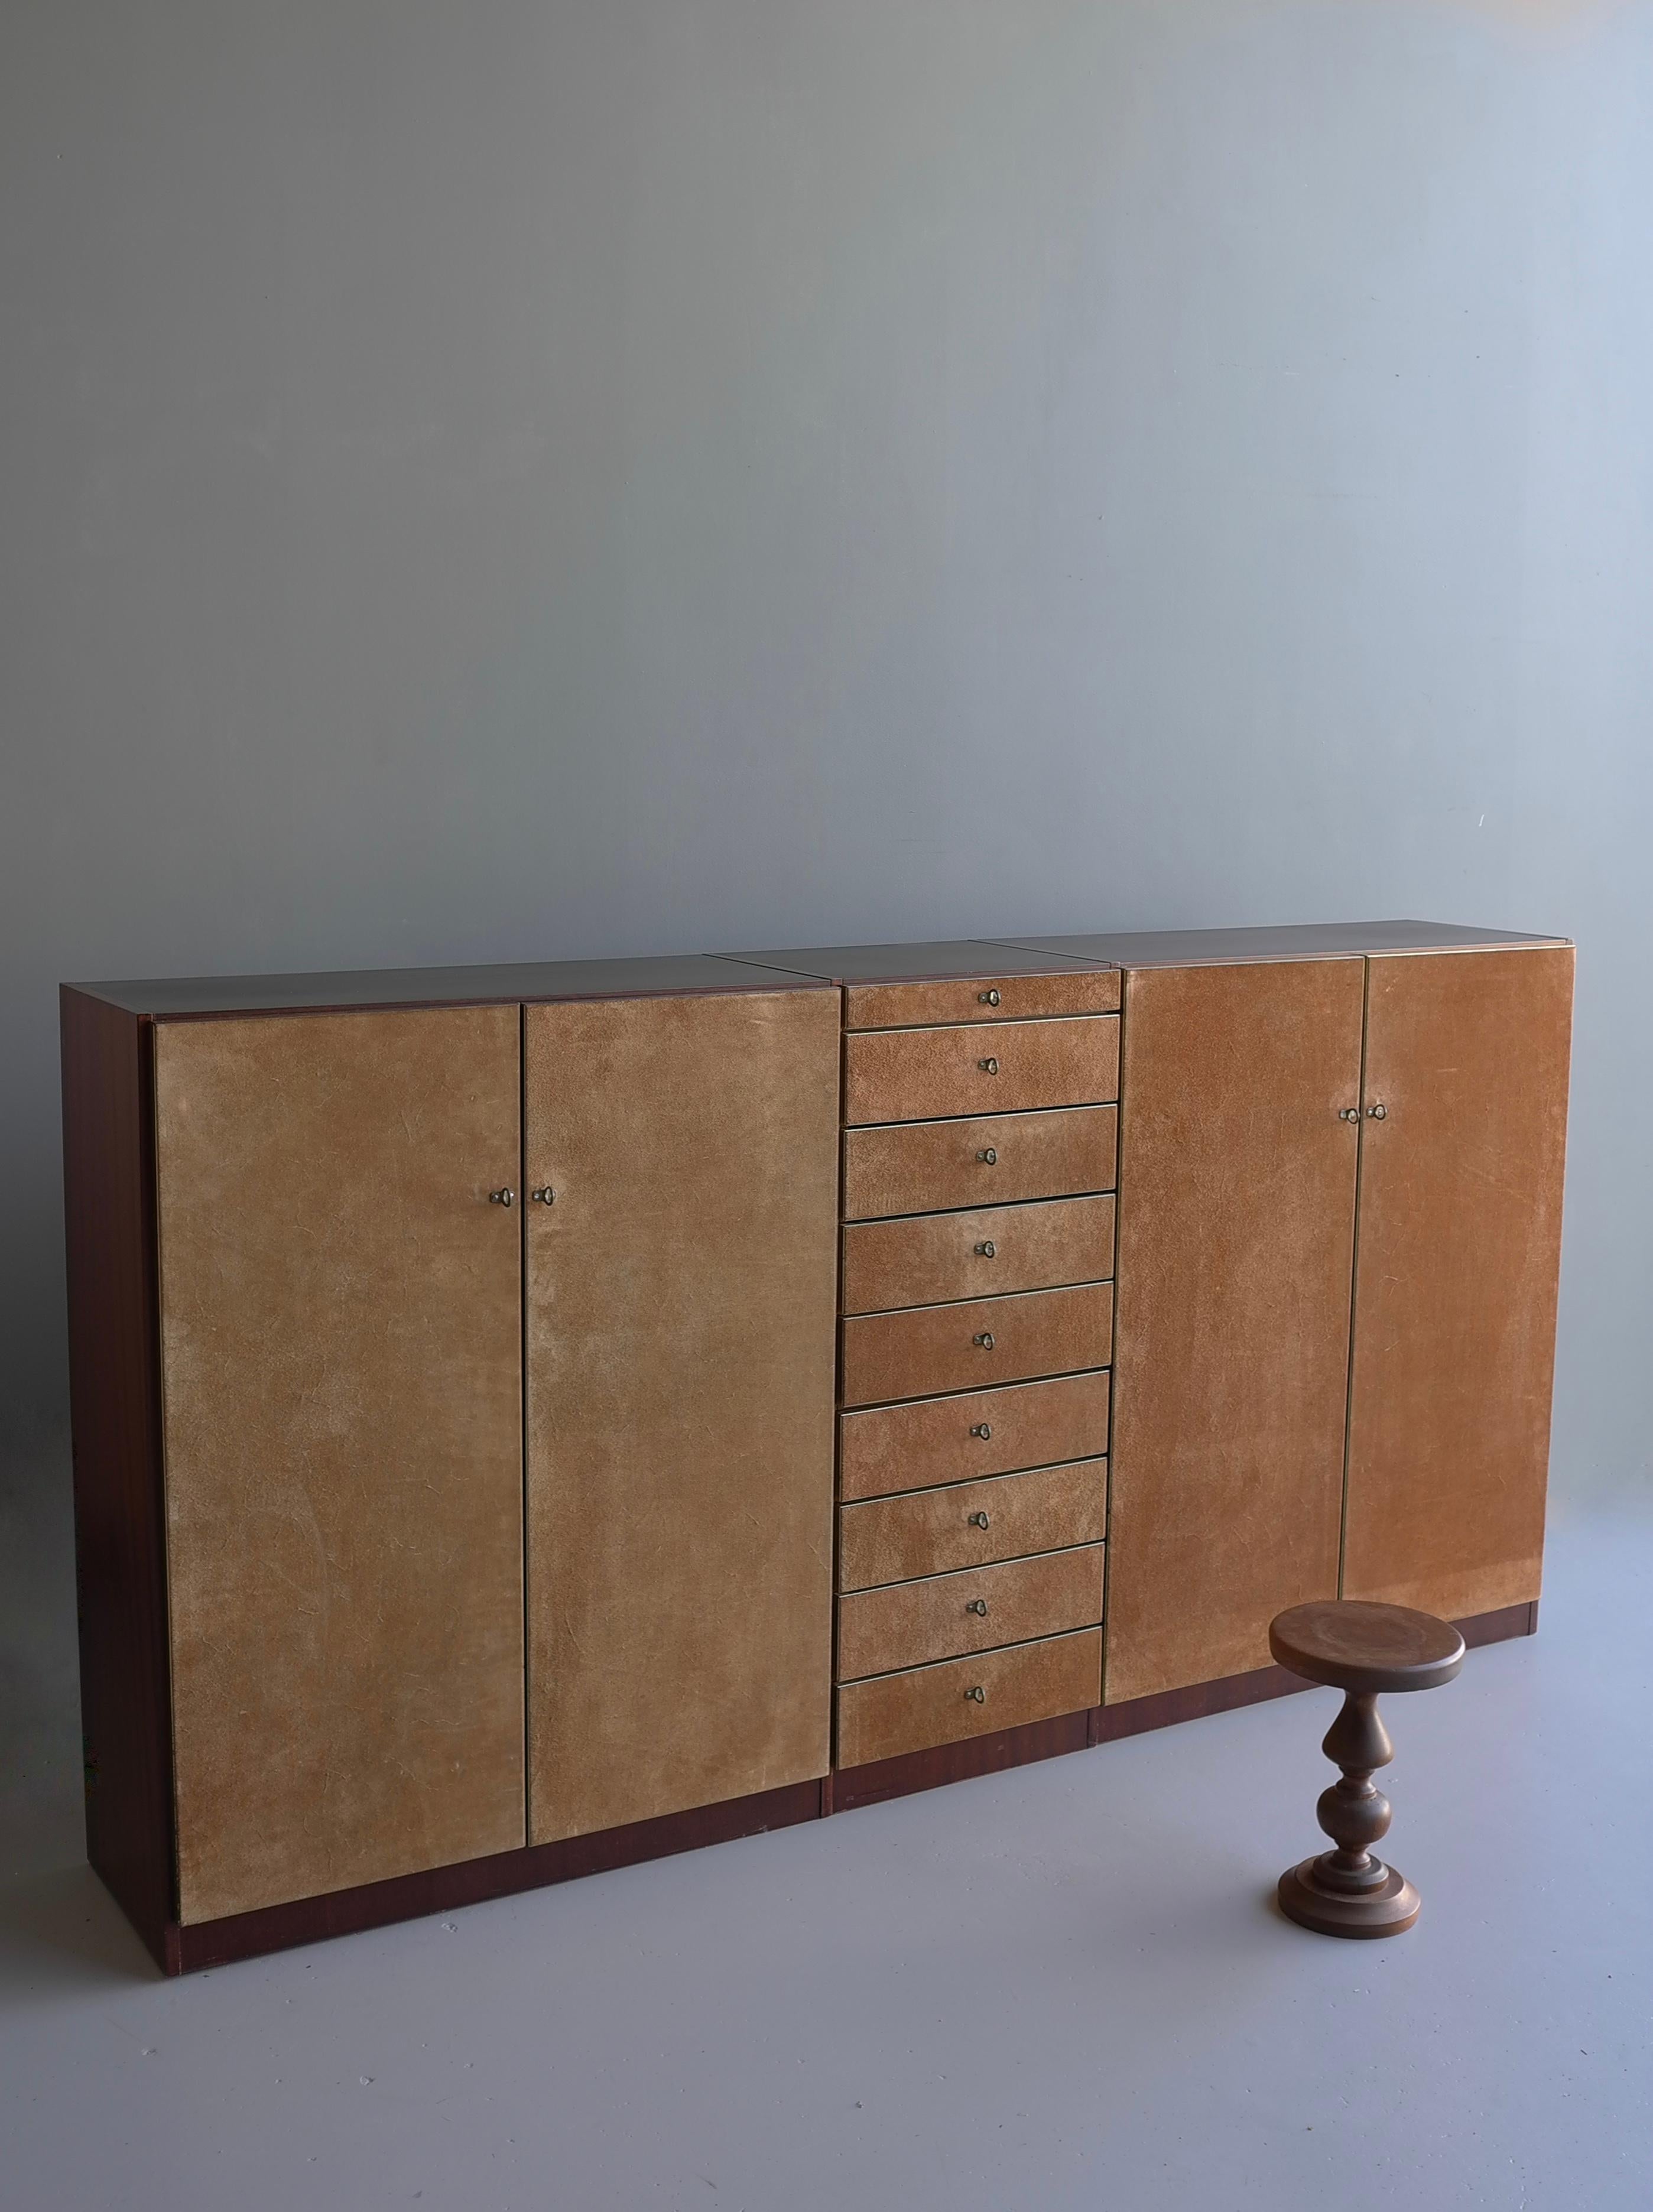 Large Meranti and Suede Highboard cabinet with brass details, Italy 1970's.
Most probably manufactured by i4 Mariani.

Sizes: width 252.5cm, depth 42.5 cm, height 129cm.

This cabinet can be dismantled completely.
In good vintage condition